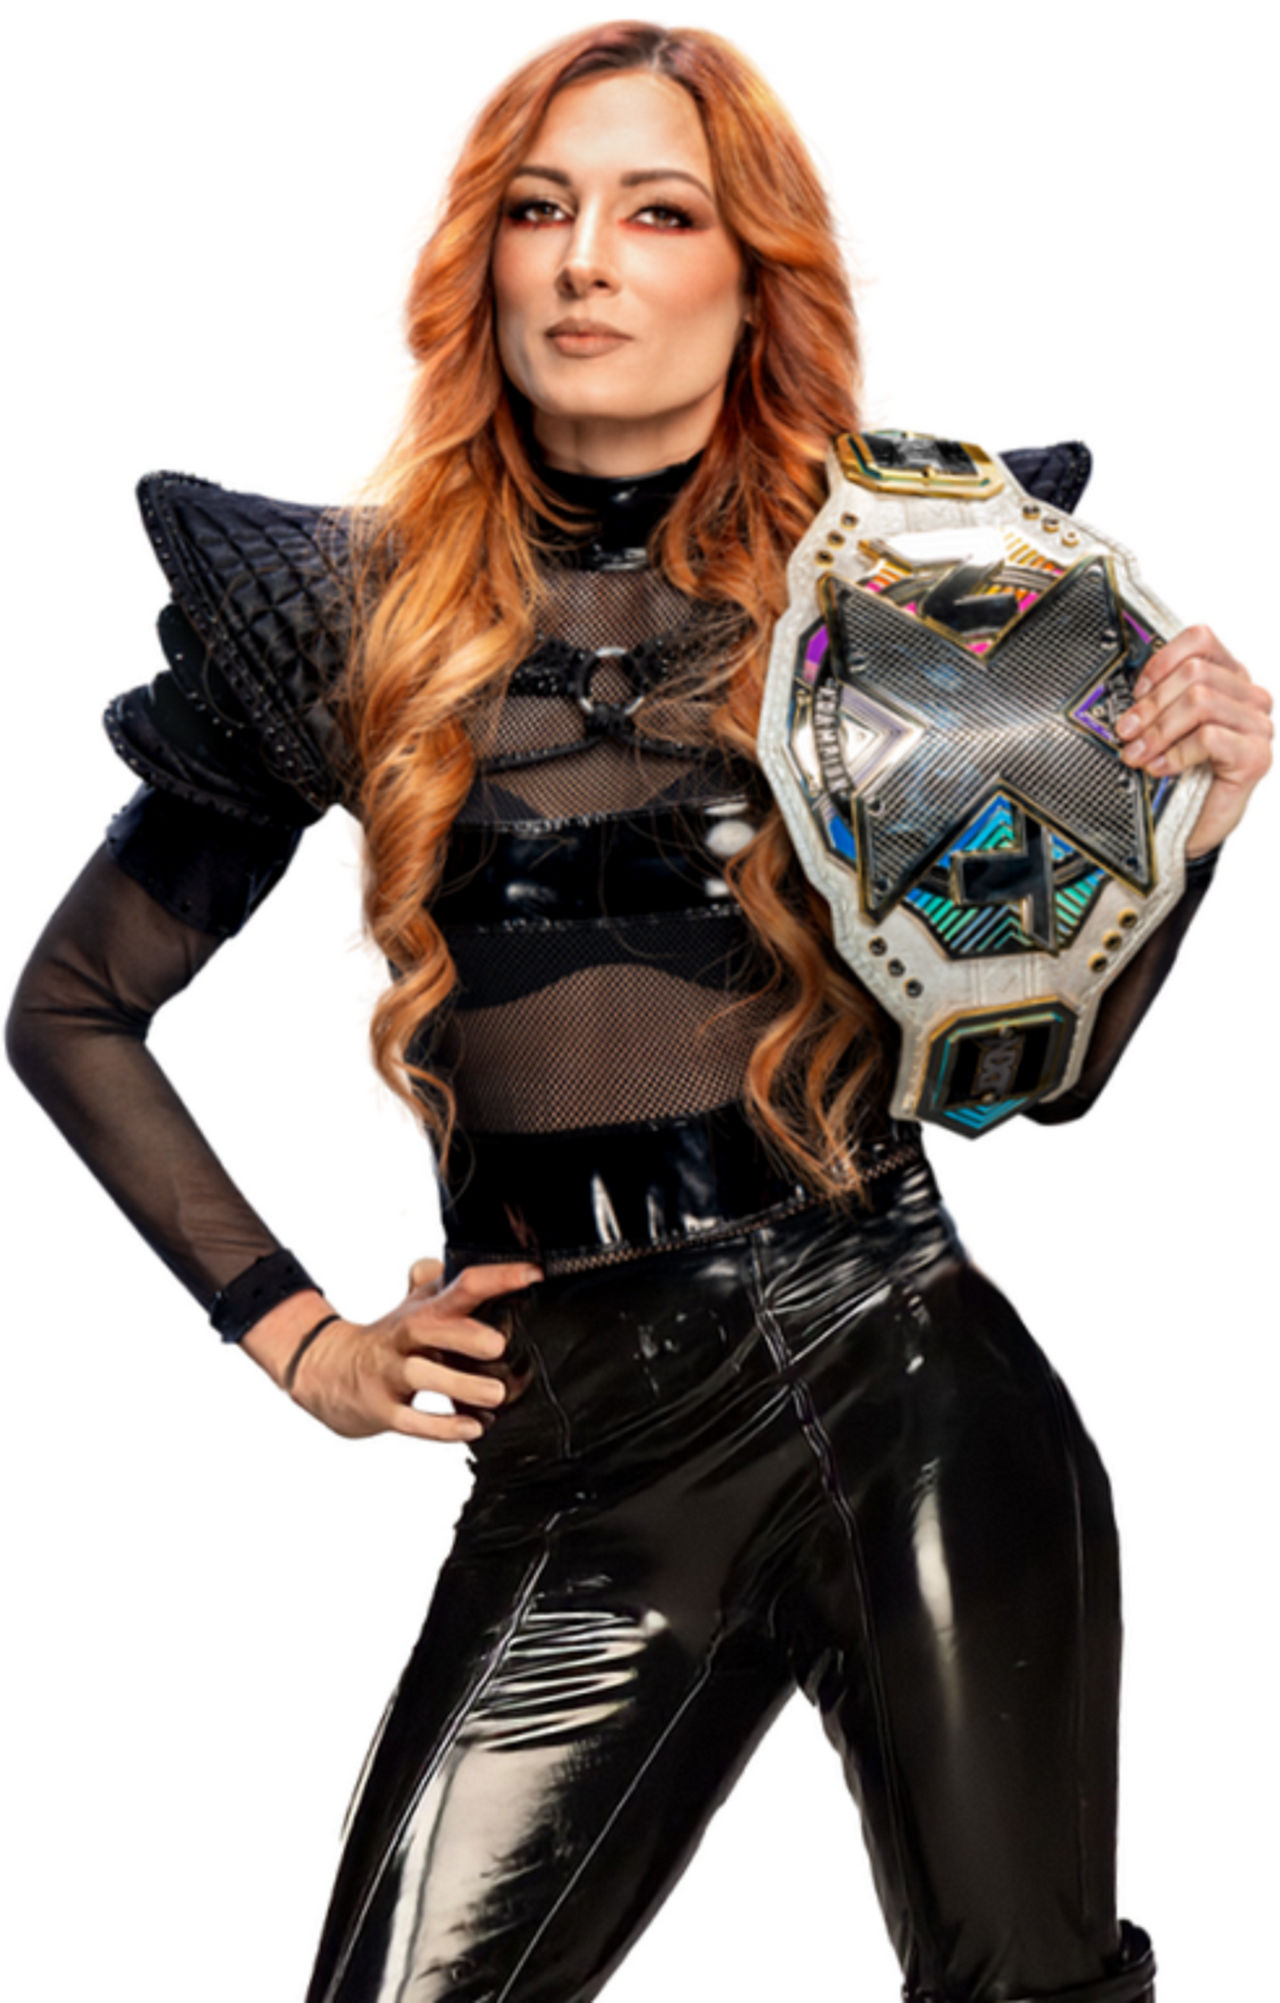 Current NXT Women's Champion Becky Lynch by Alexios29 on DeviantArt